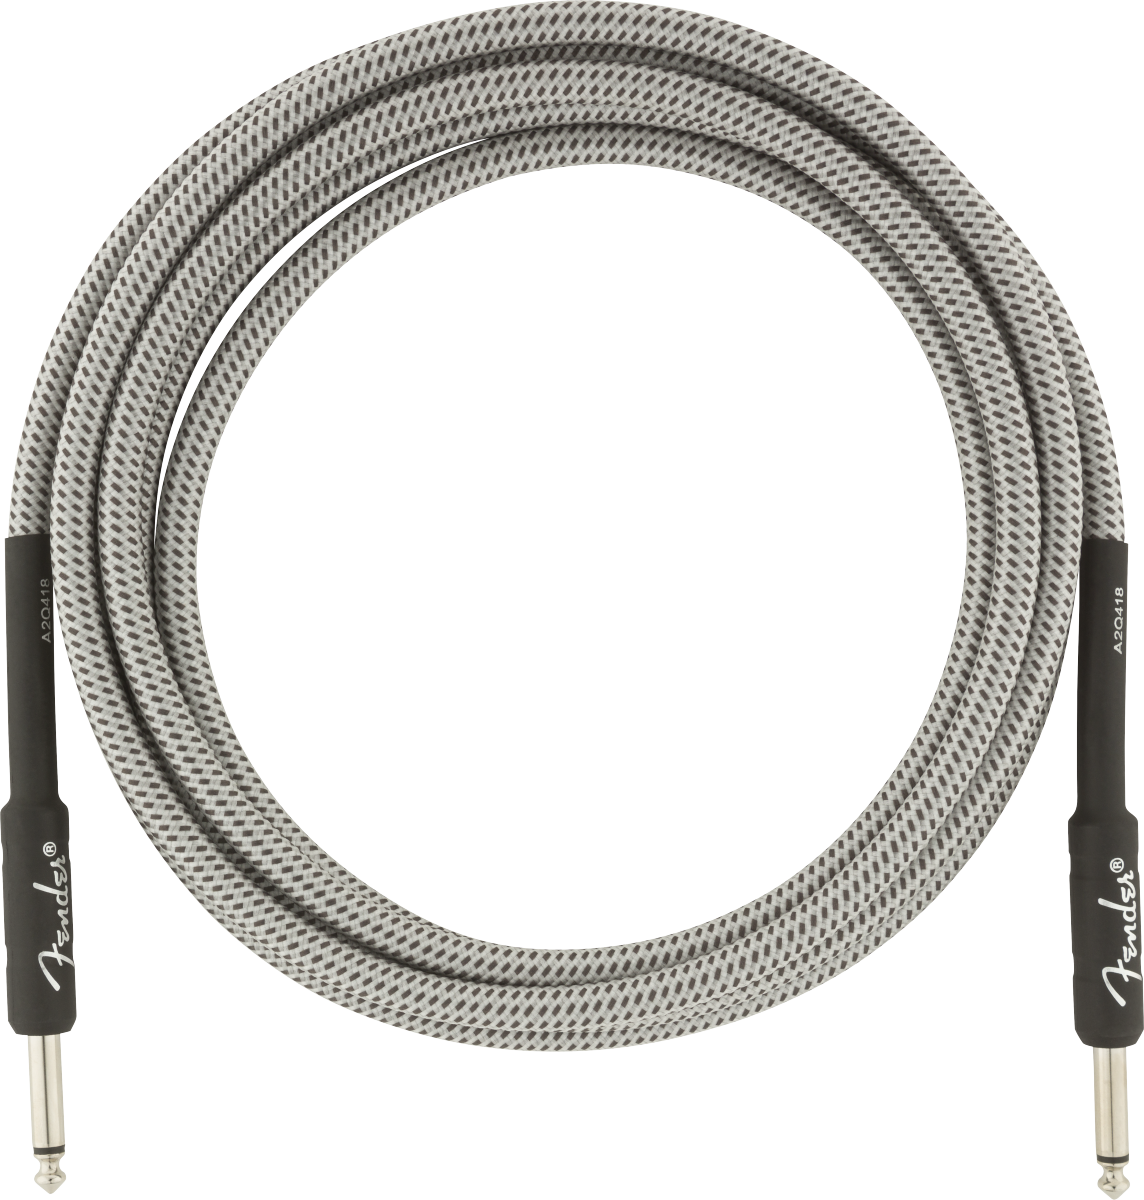 FENDER PRO INSTRUMENT CABLE 10FT - WHITE TWEED